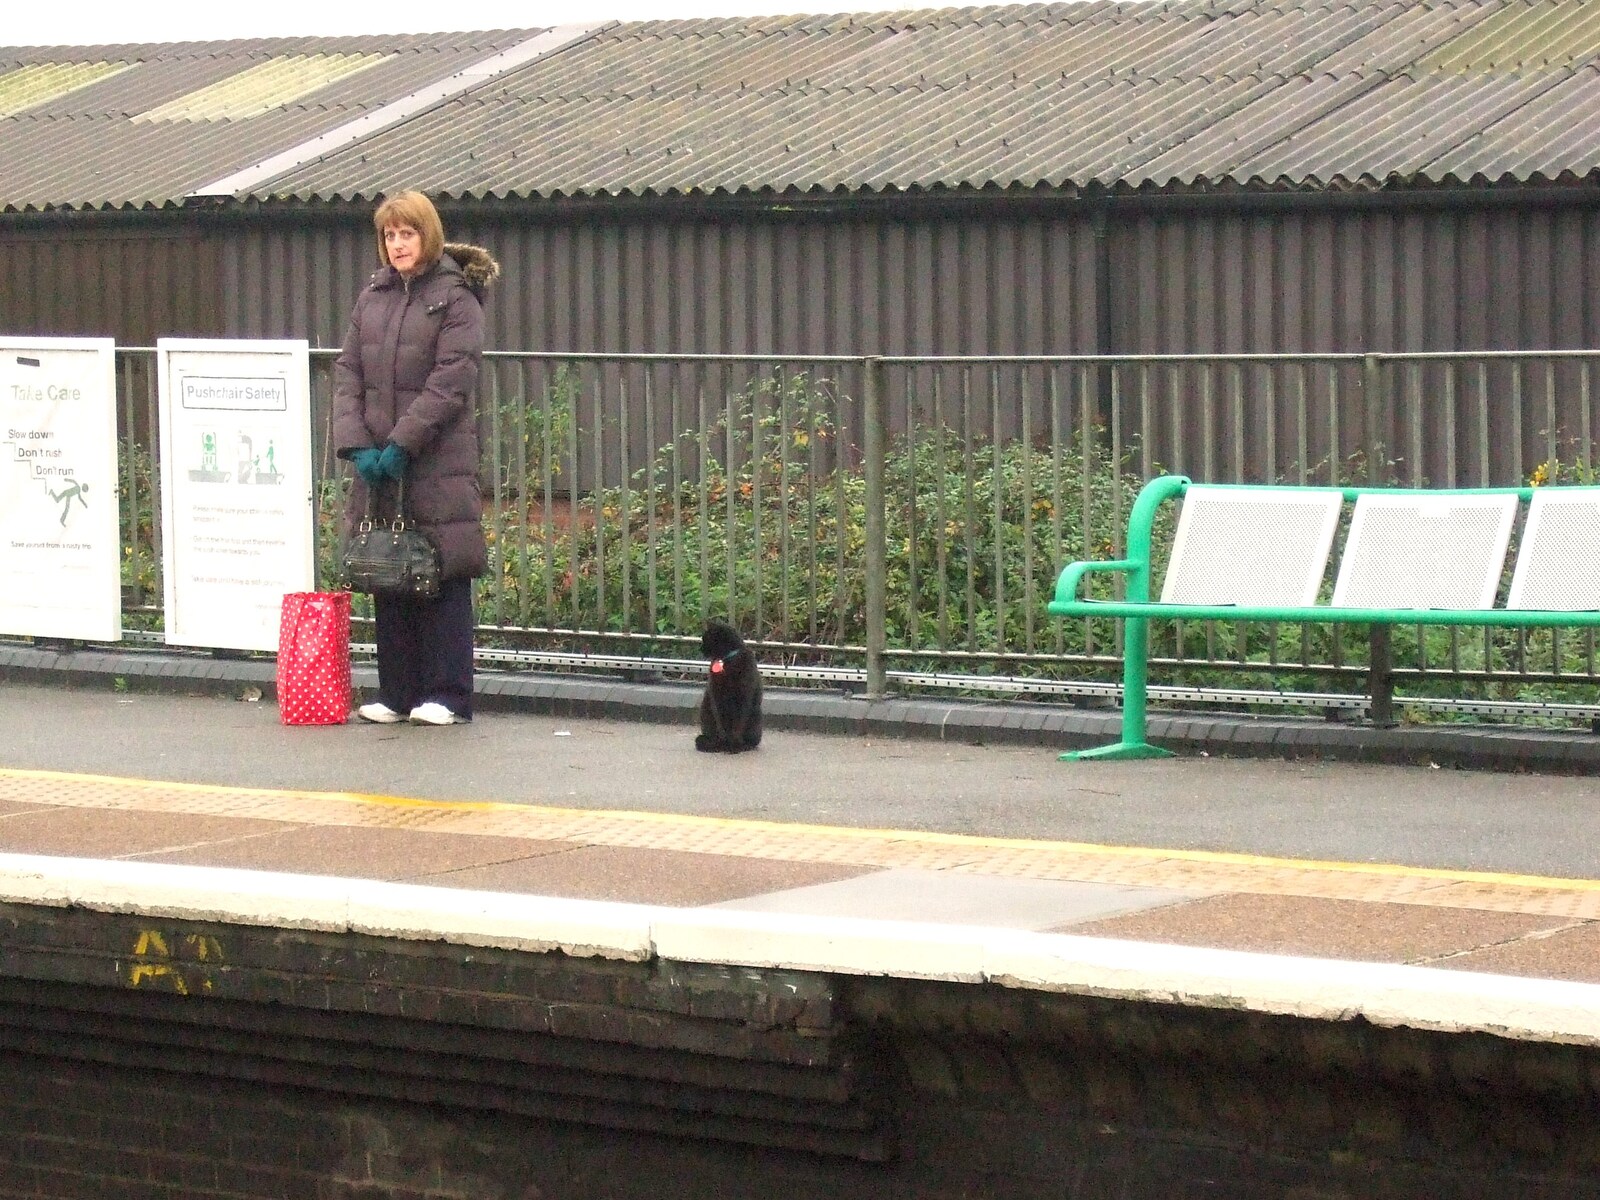 Station Cat waits for a train on platform 2 from London Demonstration and a November Miscellany, London and Brome, Suffolk - 12th November 2011